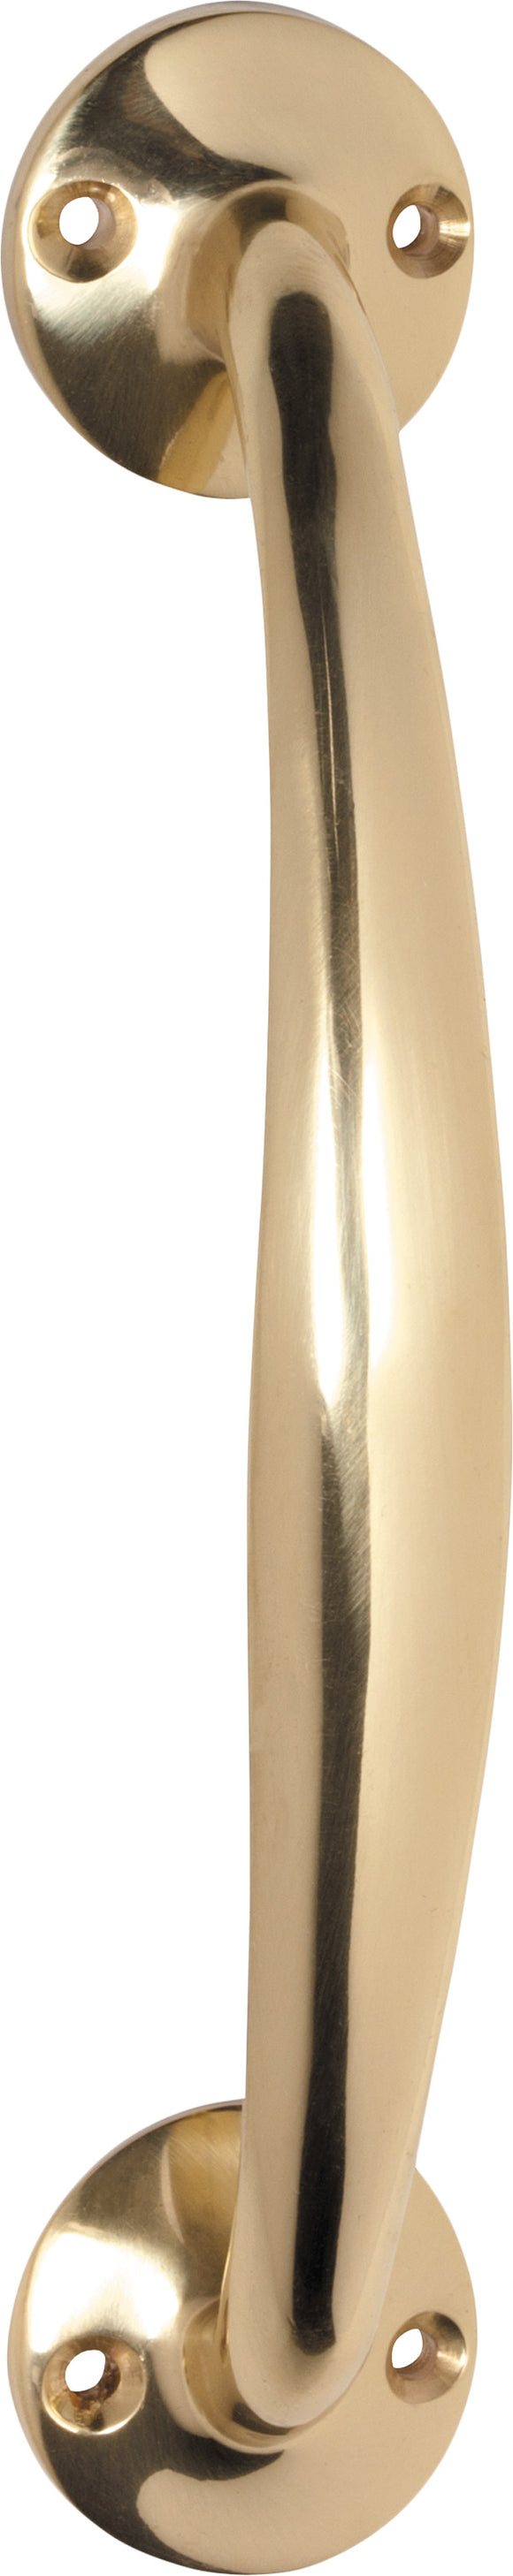 Pull Handle Telephone Polished Brass L187xP45mm